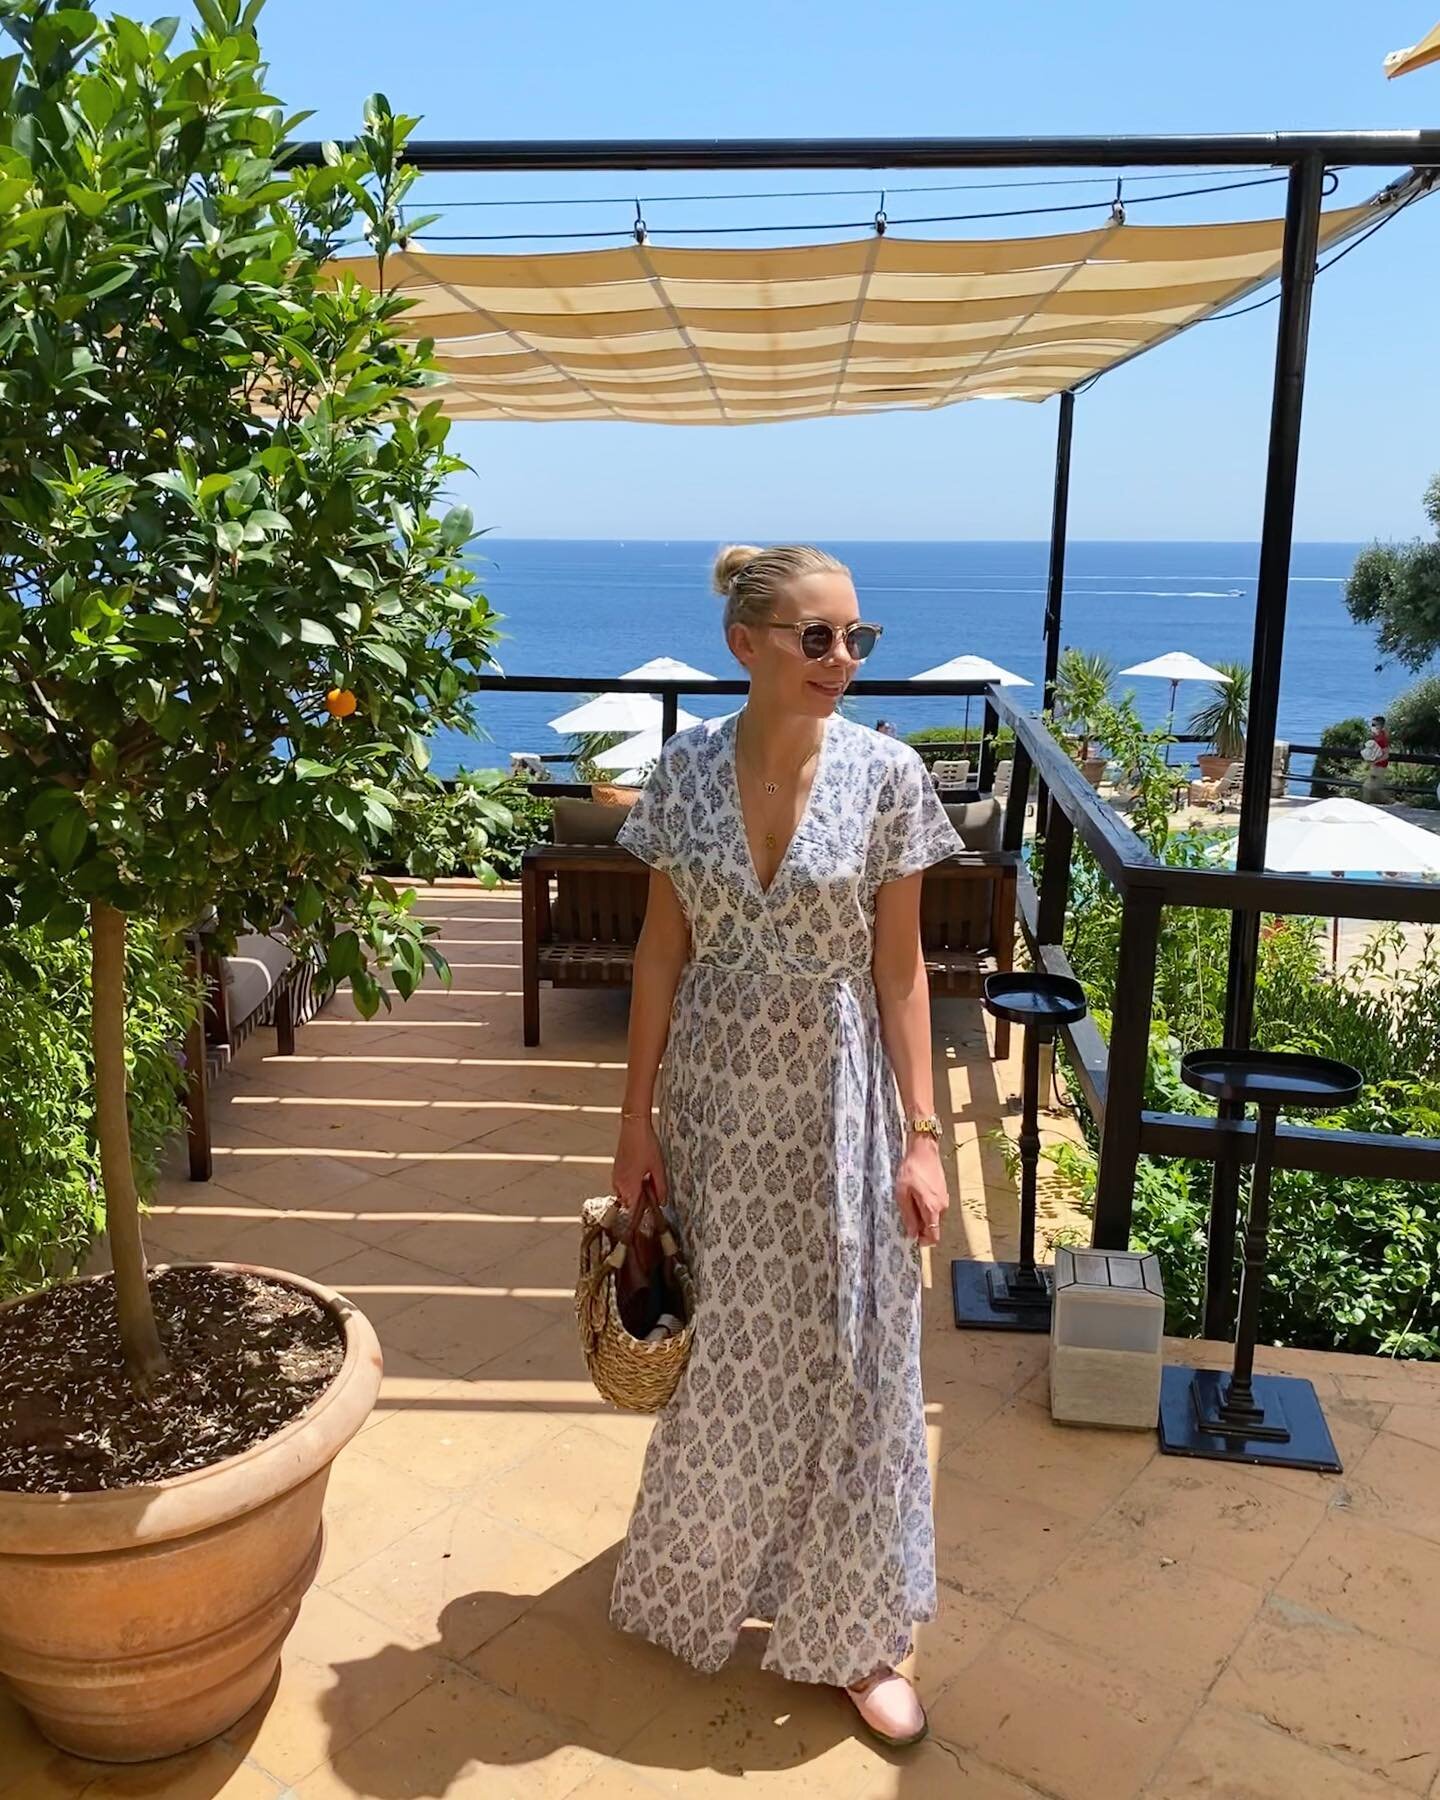 Each day the Tuscan sunlight illuminates the pristine blue bay and its no surprise that Il Pellicano is famed for its sprezzatura, stylish, effortless spirit. Co-founder, Sophie voyaging in @curated_bazaar where each beautiful dress helps to provide 